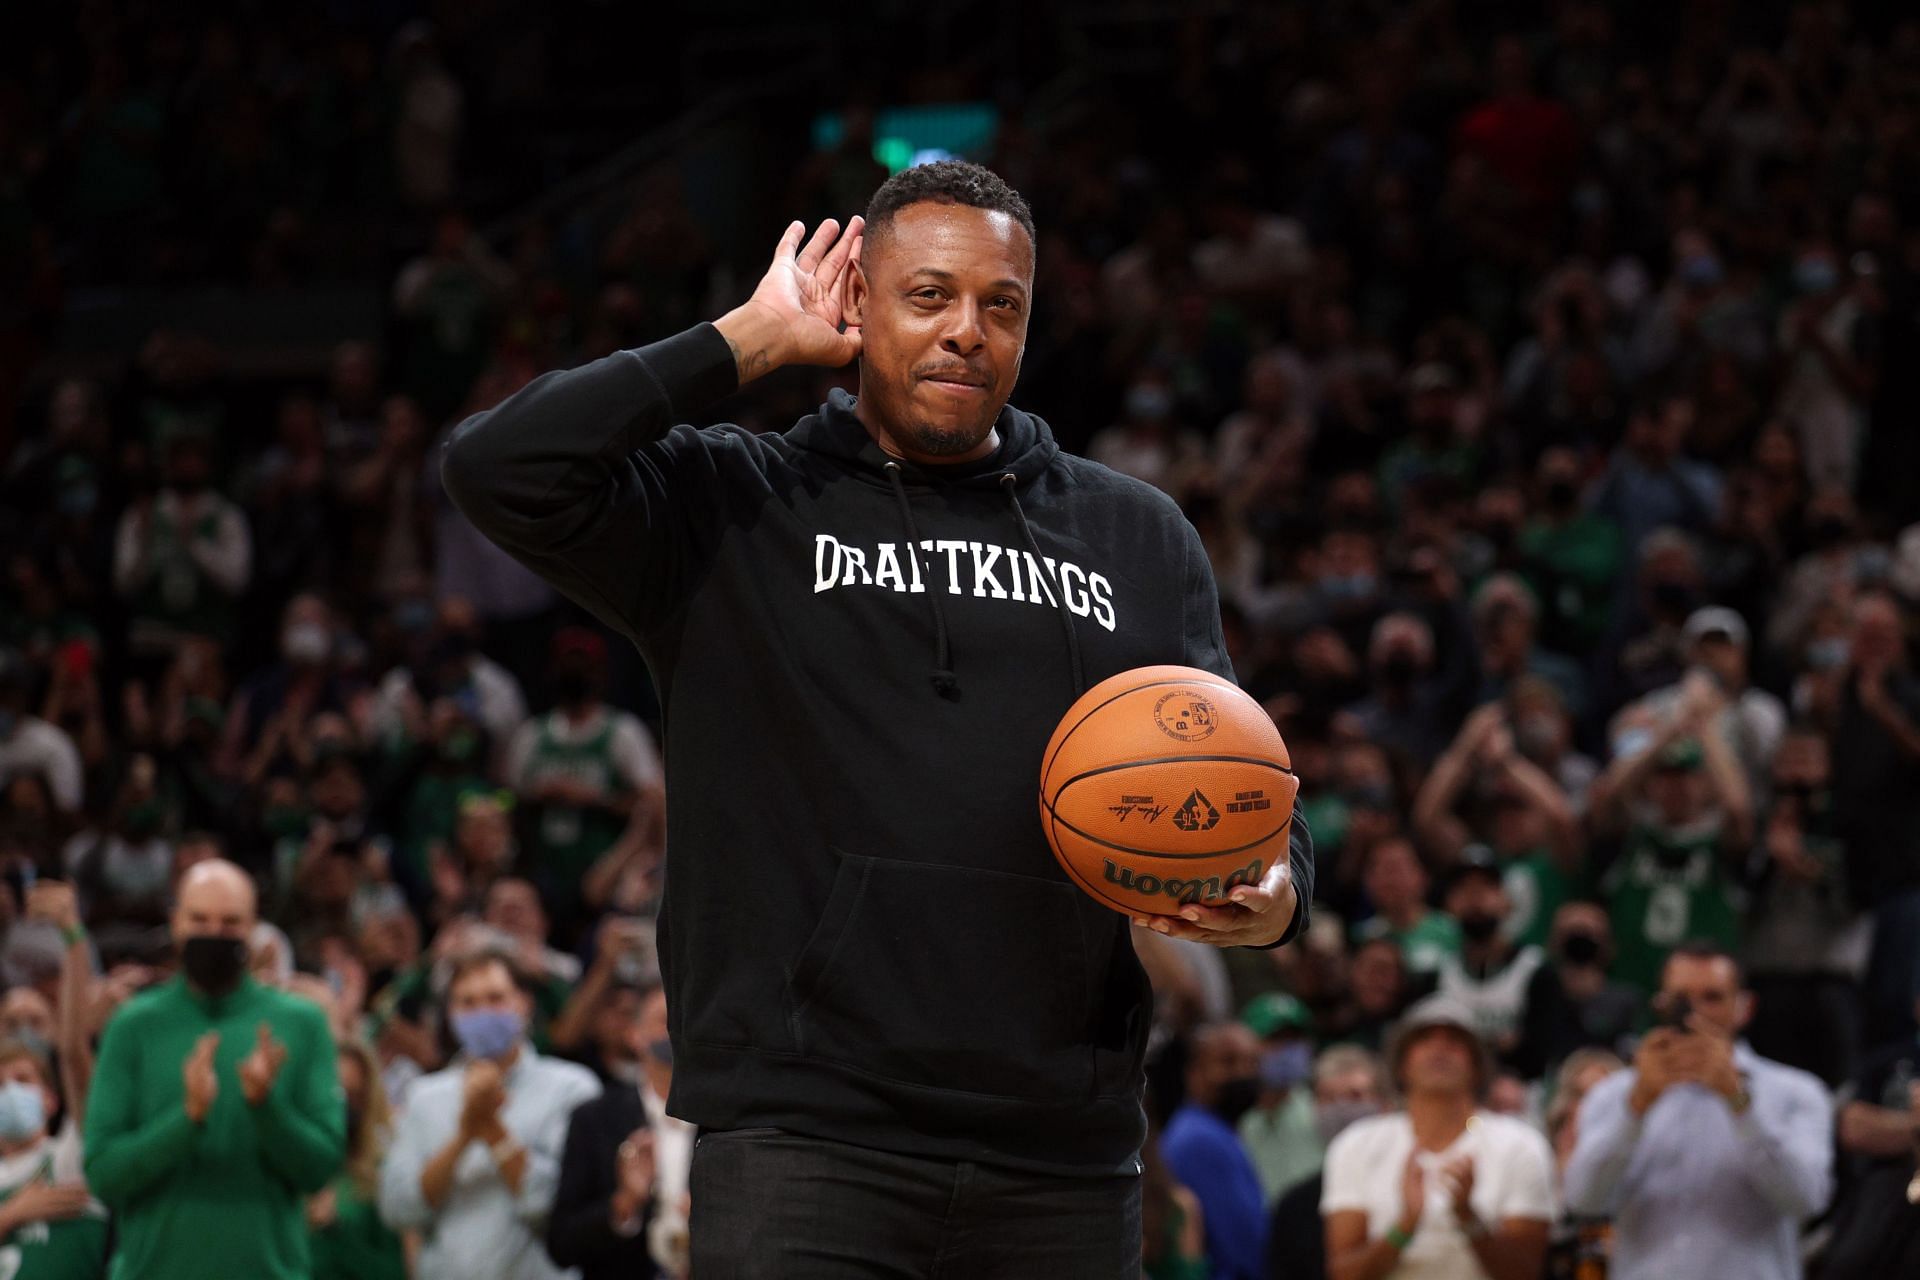 Former member of the Boston Celtics Paul Pierce is introduced before the Celtics home opener at TD Garden